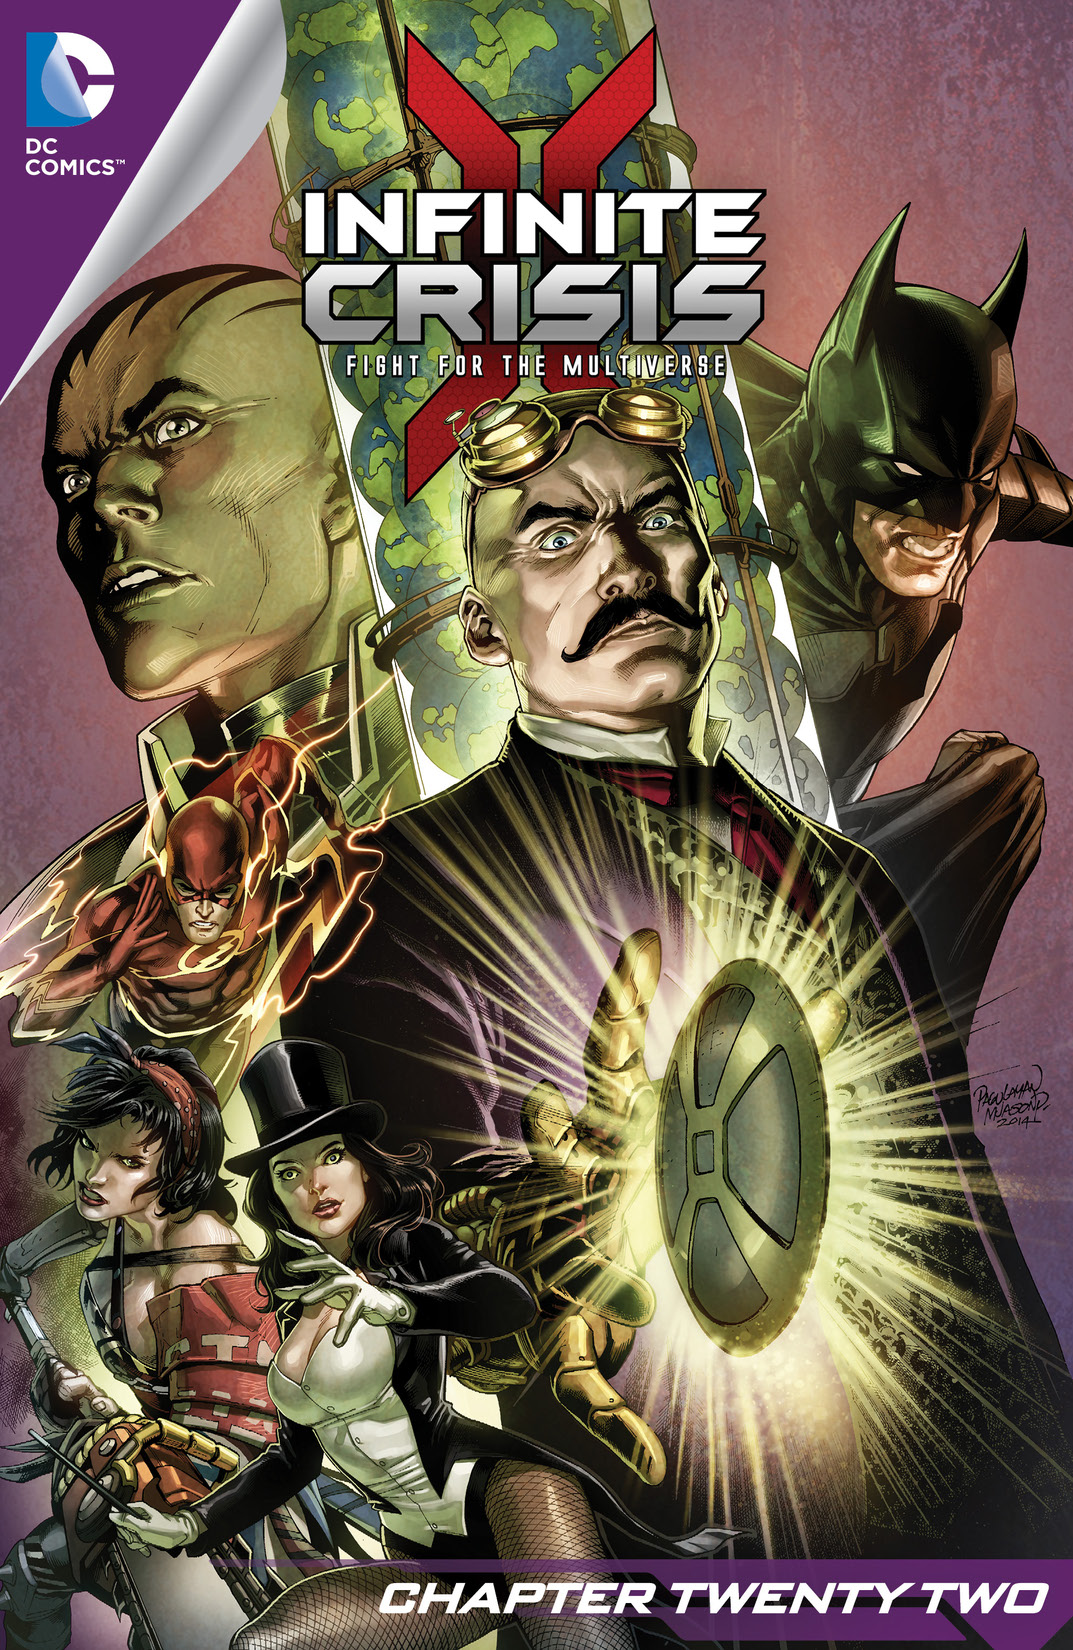 Infinite Crisis: Fight for the Multiverse #22 preview images